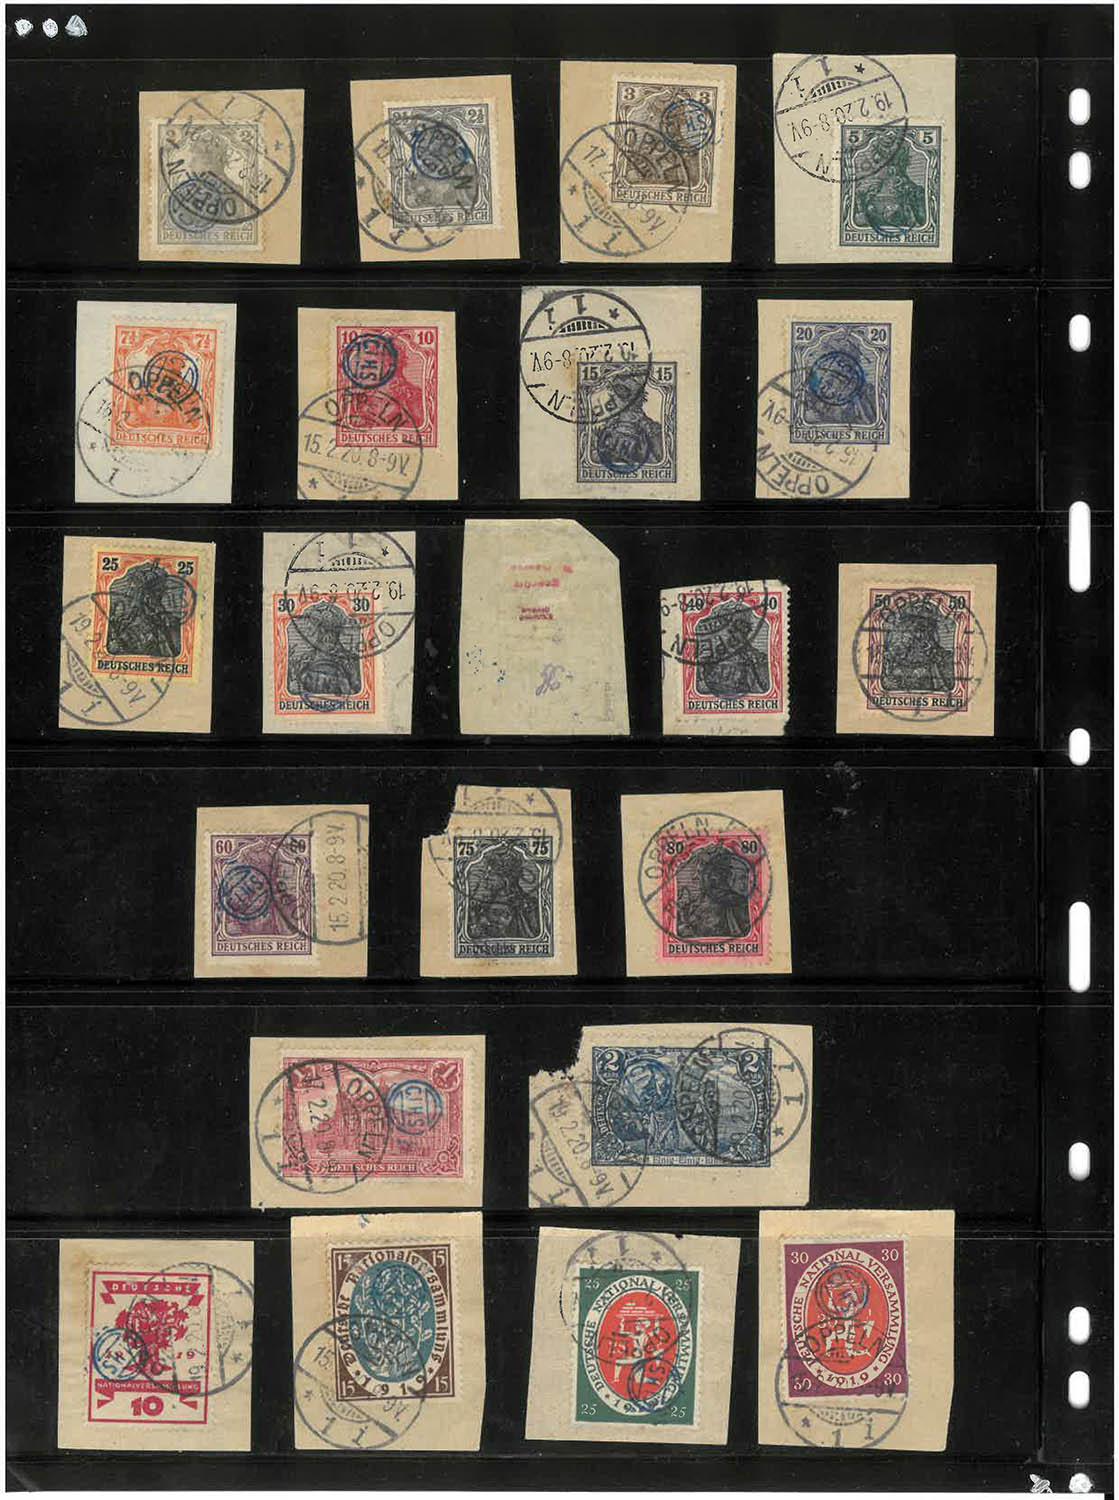 Lot 2093 - Upper Silesia. 1920 Inter-Allied Commission, a spectacular array of the C.I.H.S. handstamps, seldom